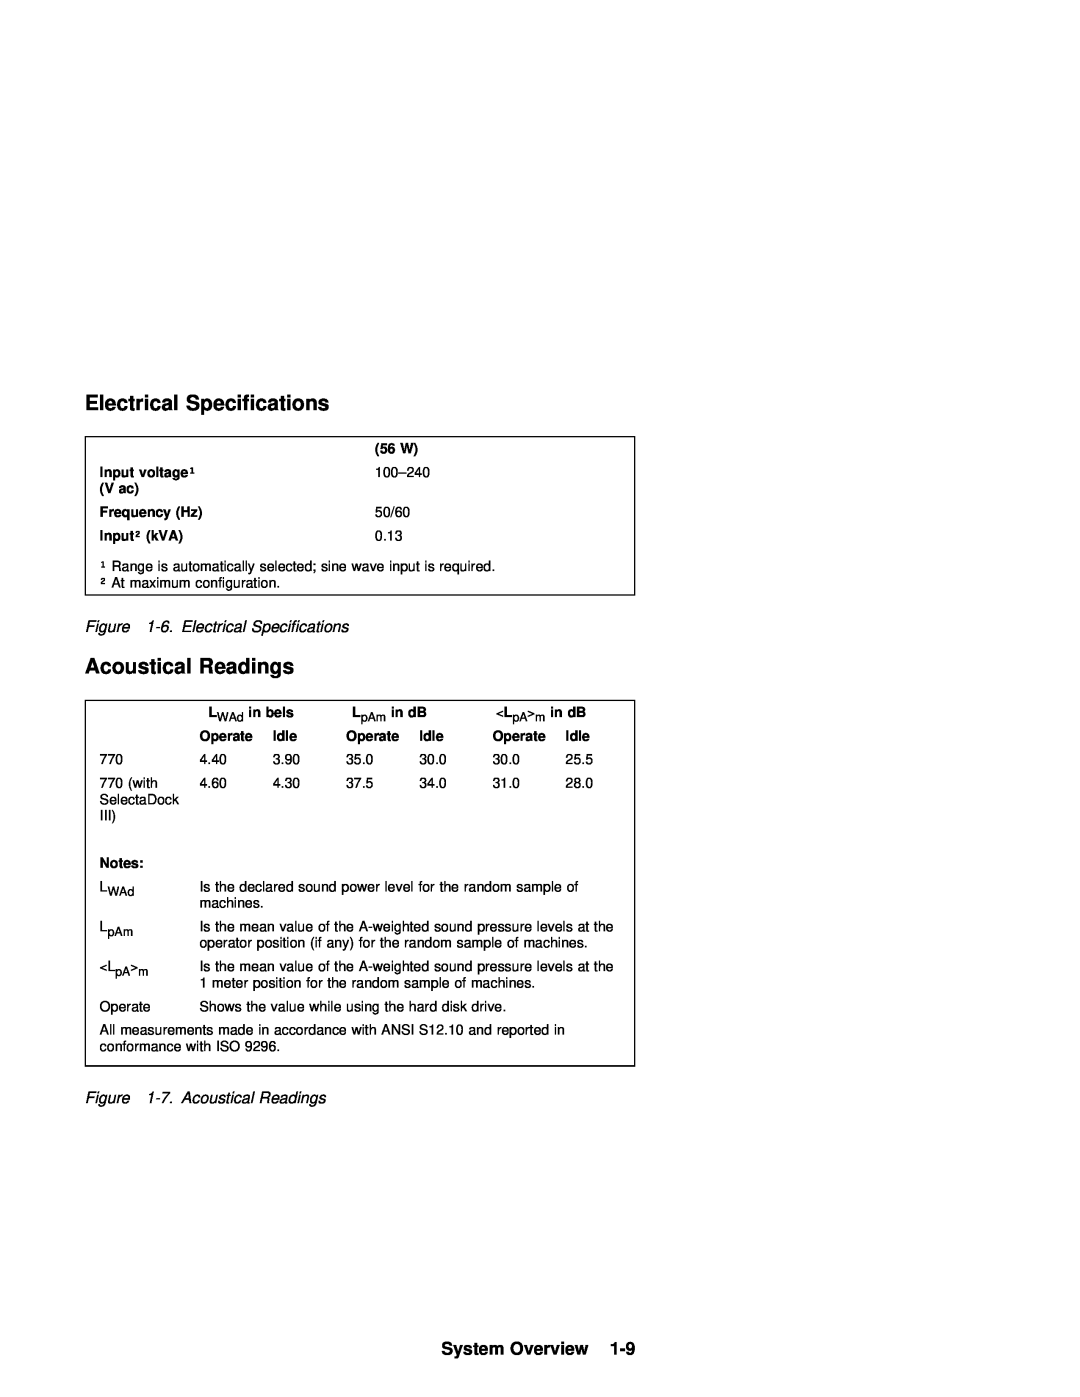 IBM 770 manual Electrical Specifications, System Overview, Acoustical Readings 